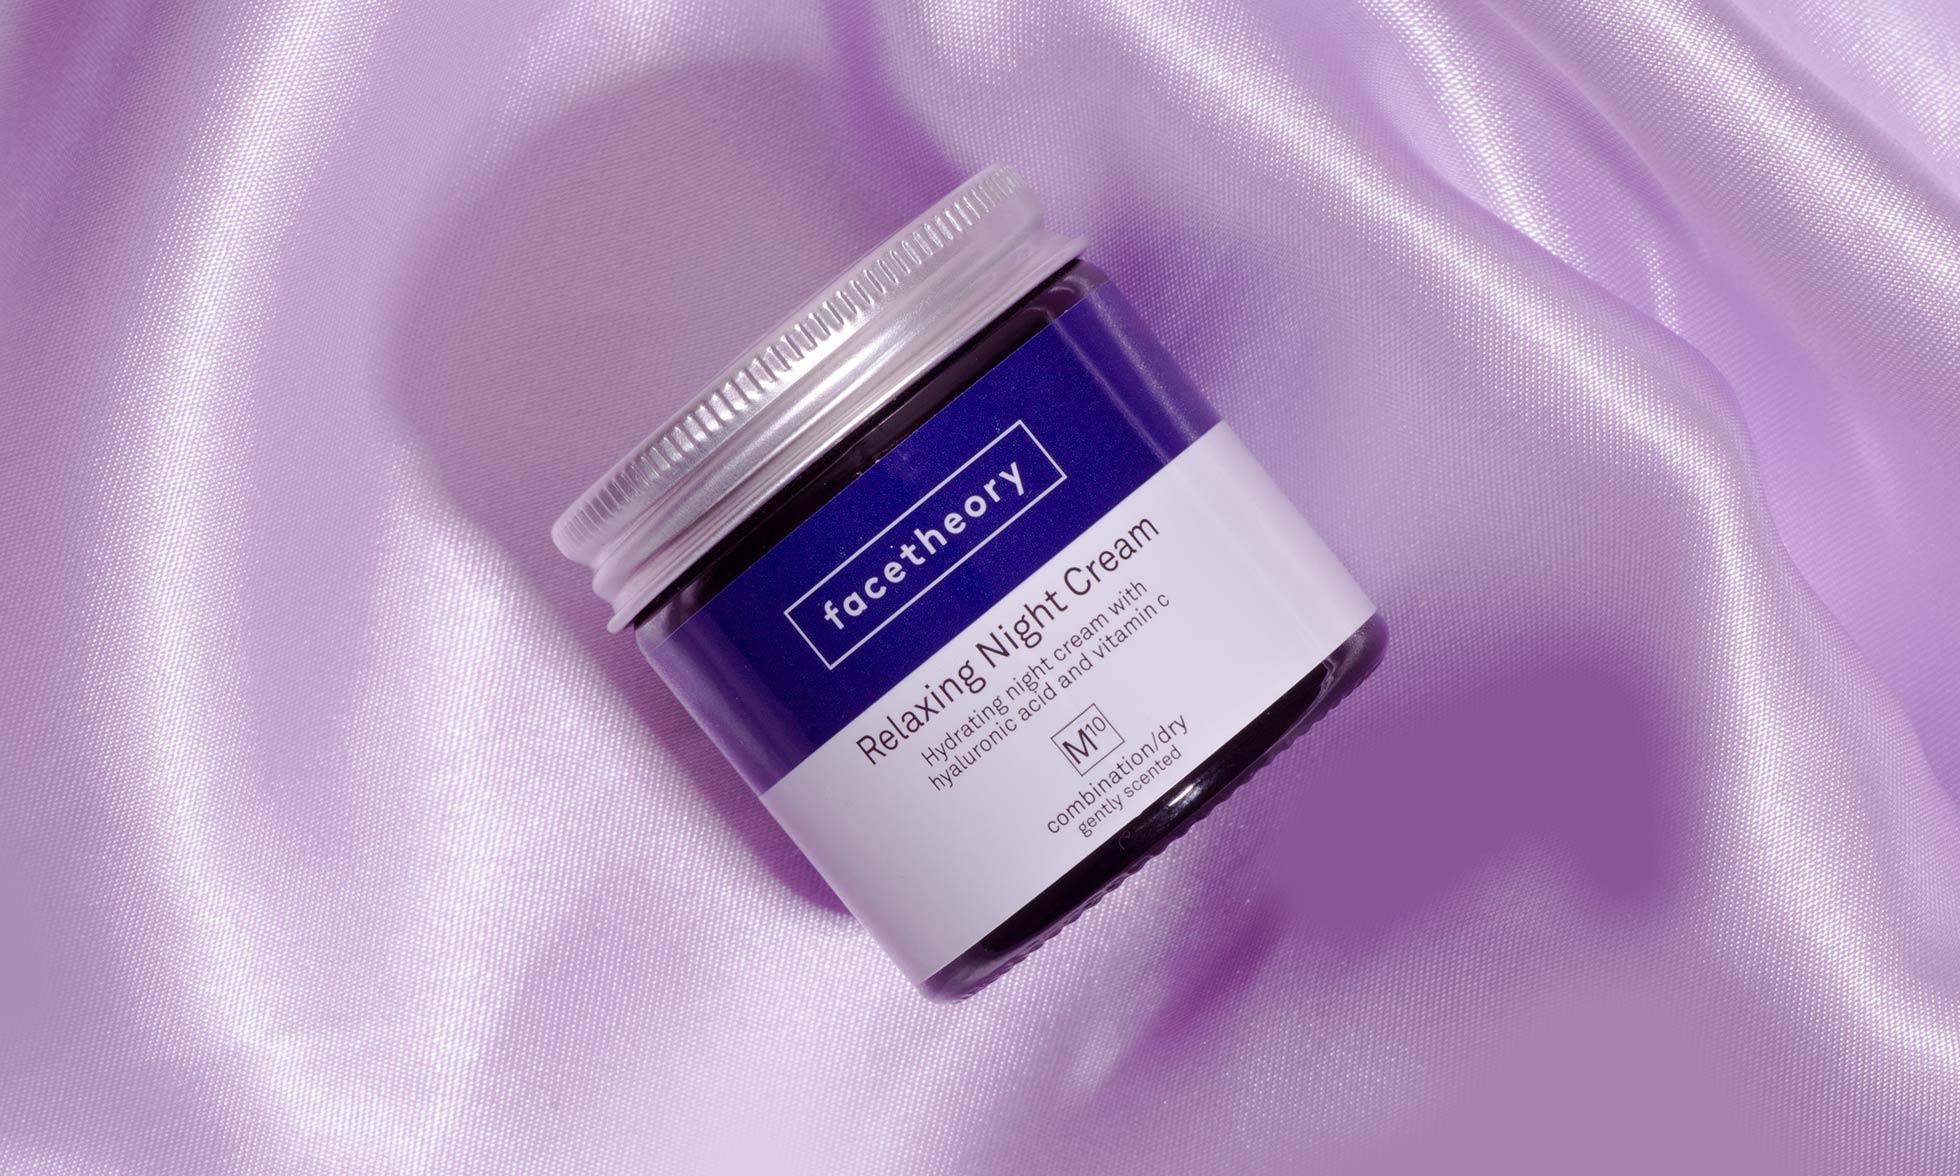 Facetheory skincare products: relaxing night cream 2